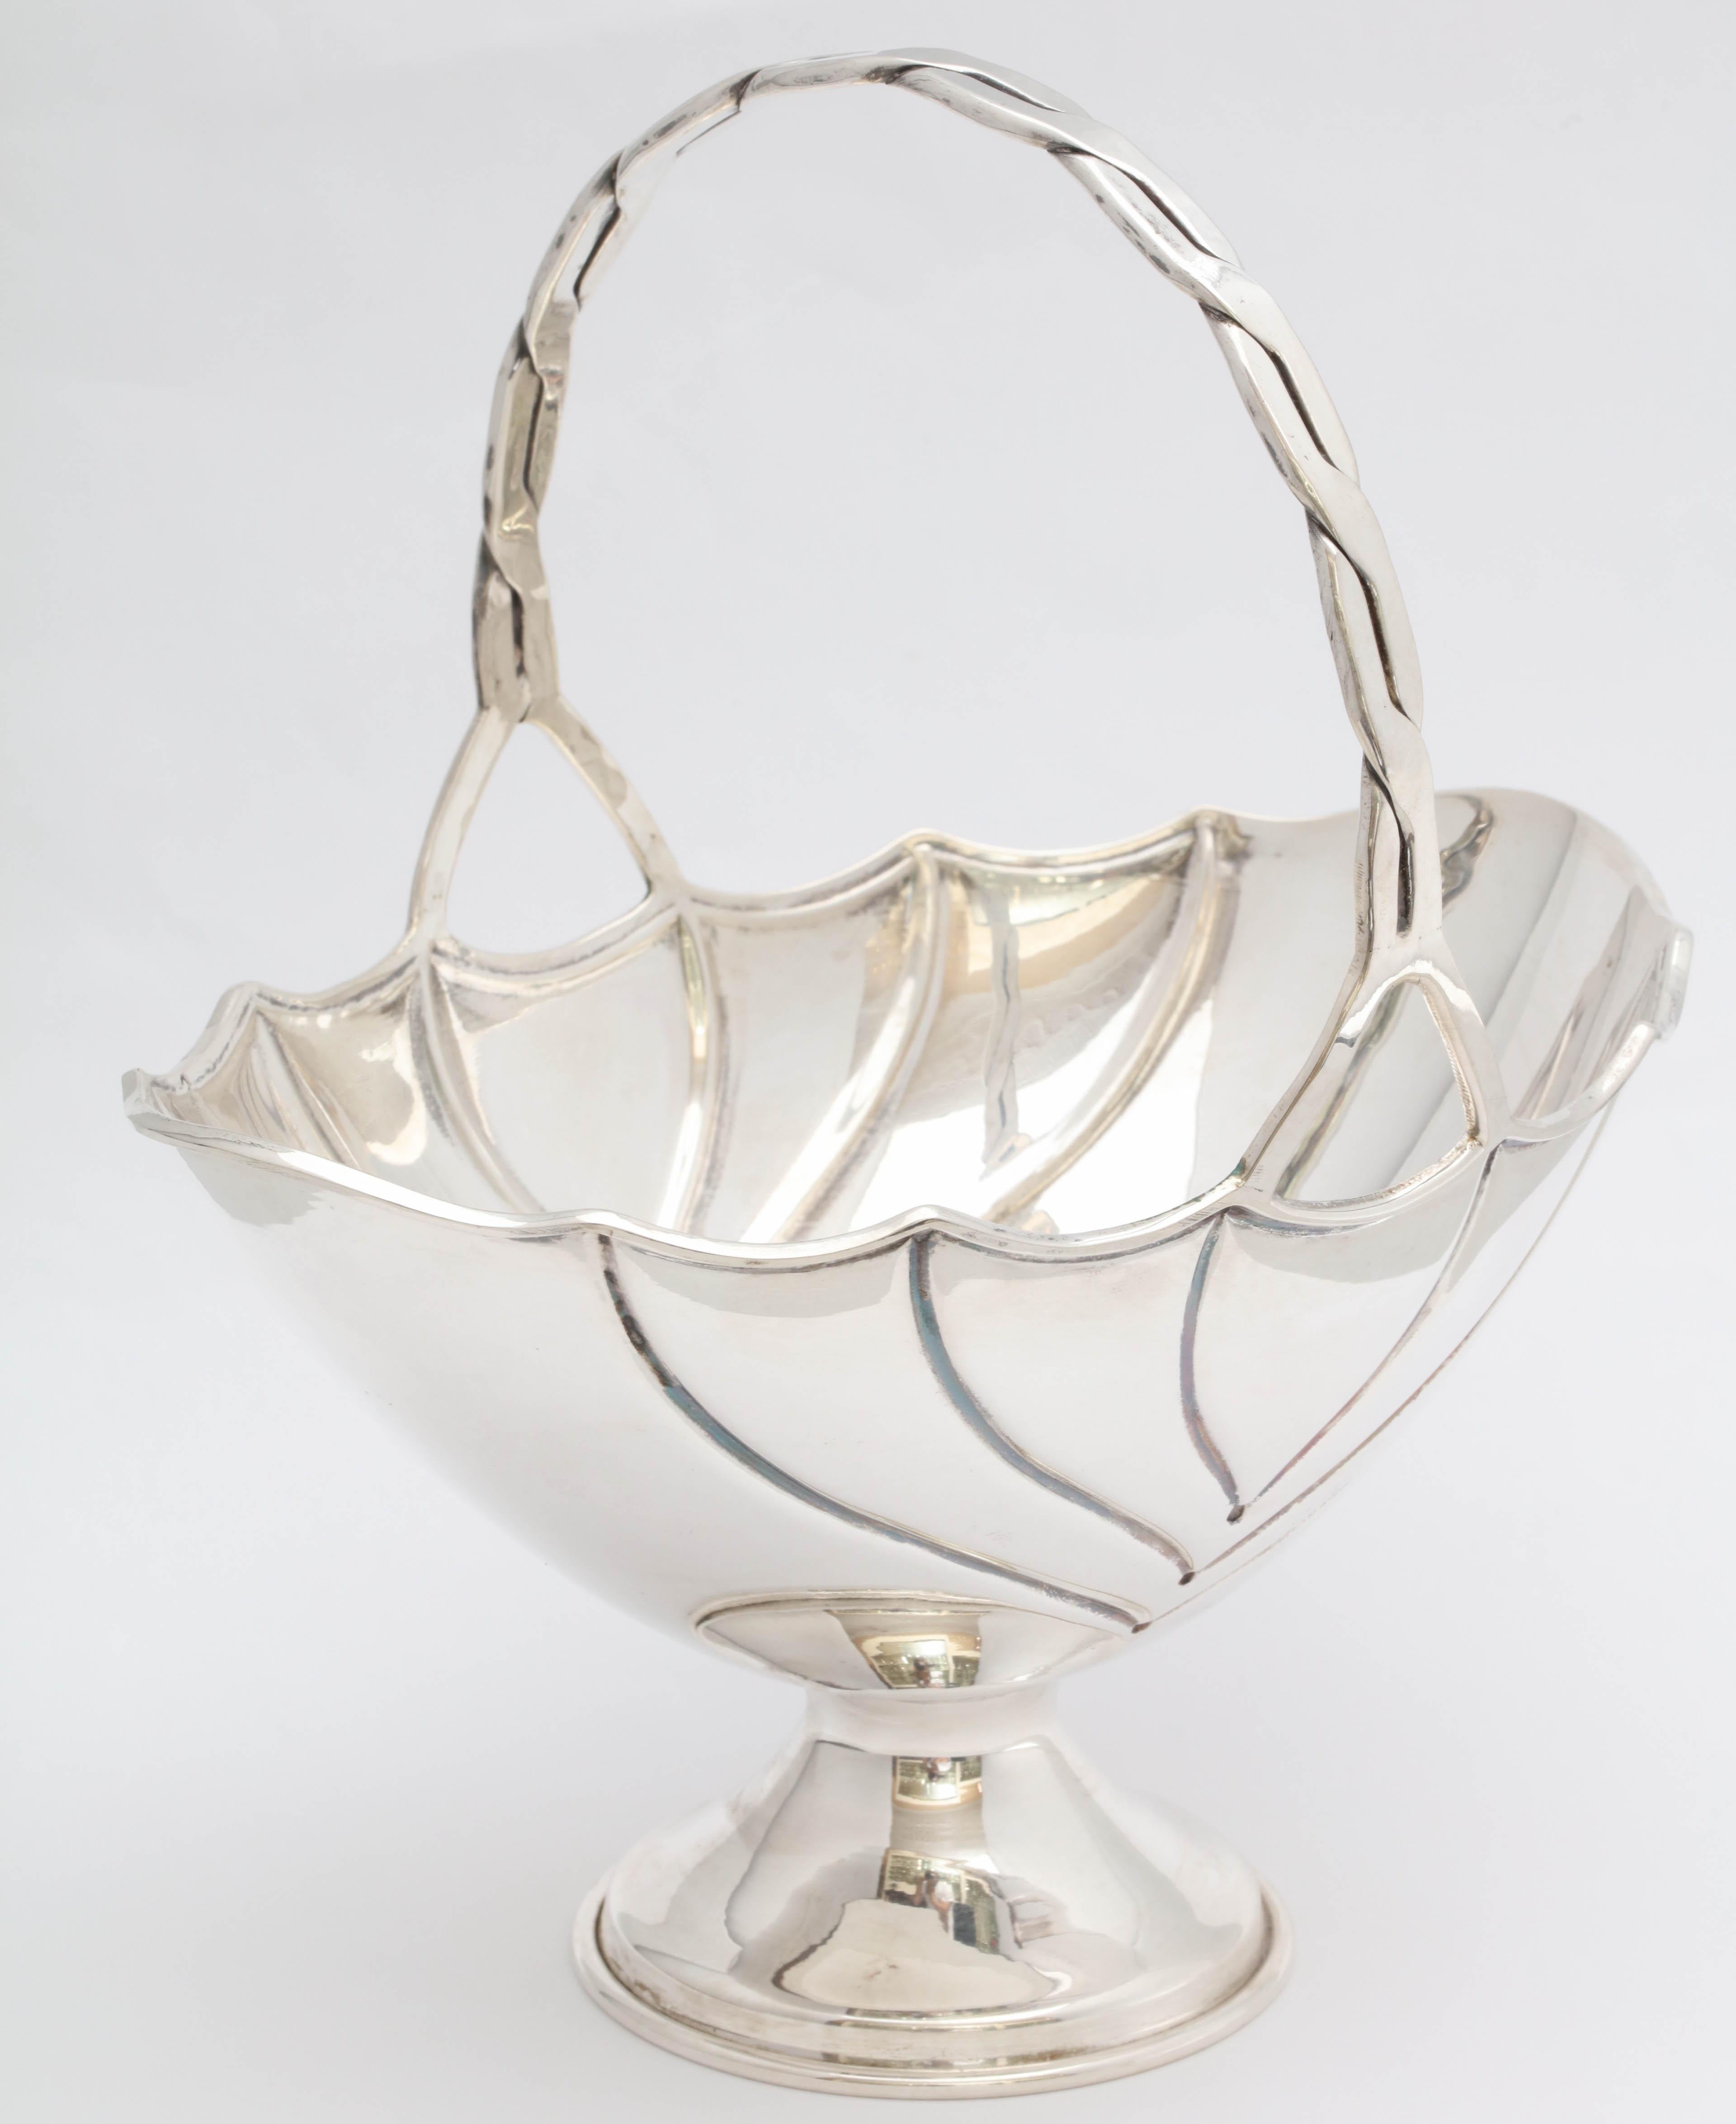 Art Deco, sterling silver table basket on pedestal base, American, circa 1930s. Measures: 8 1/4 inches high (to top of handle) x 7 inches wide (at widest point) x 5 inches deep (at deepest point); weighs 7.830 troy ounces. Lovely design. Dark spots